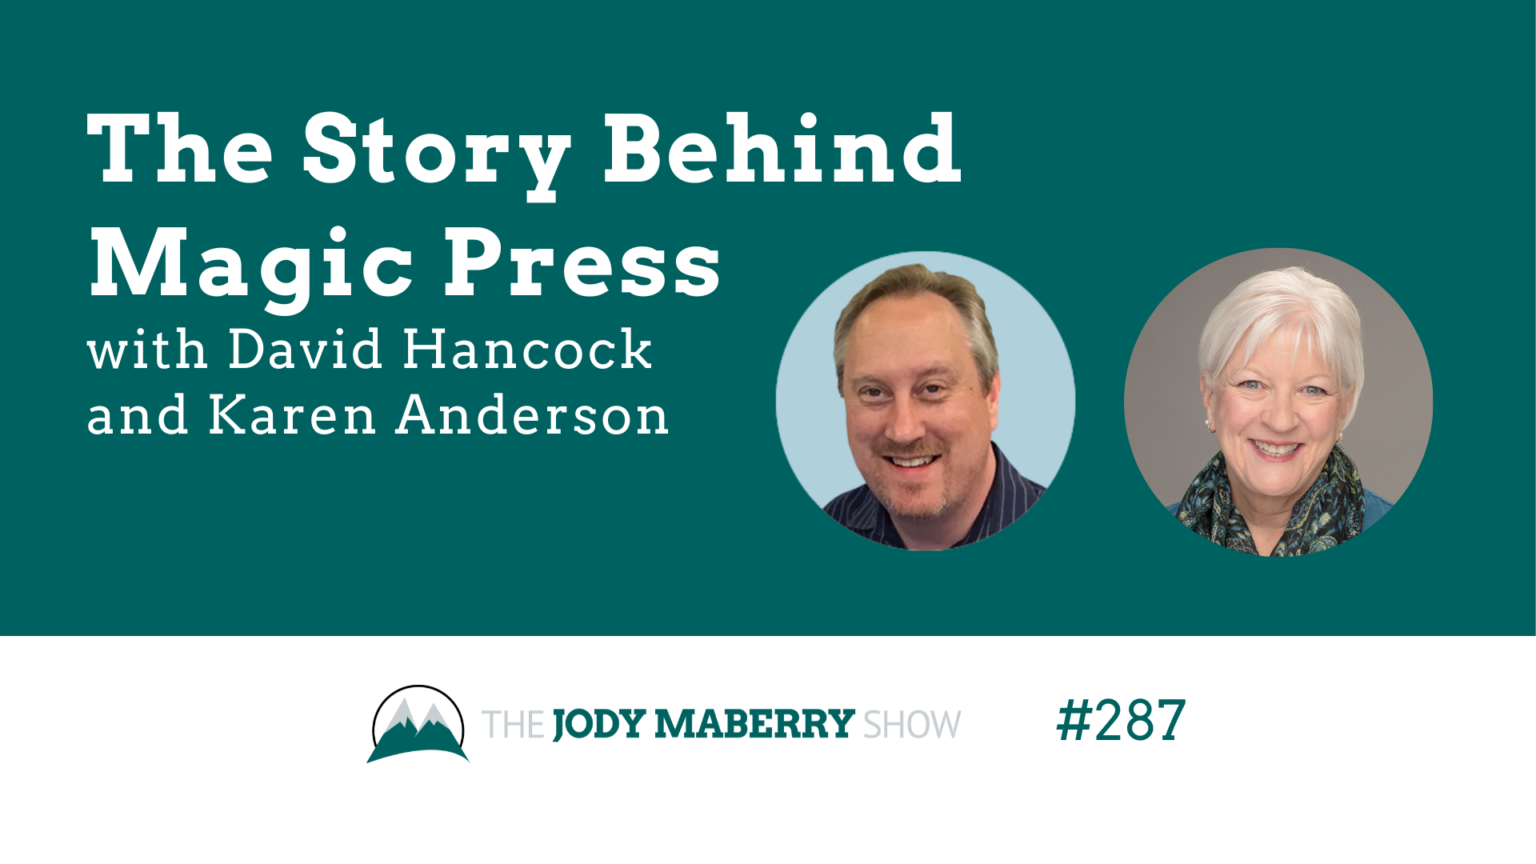 Jody Maberry Show Episode 287 The Story Behind Magic Press